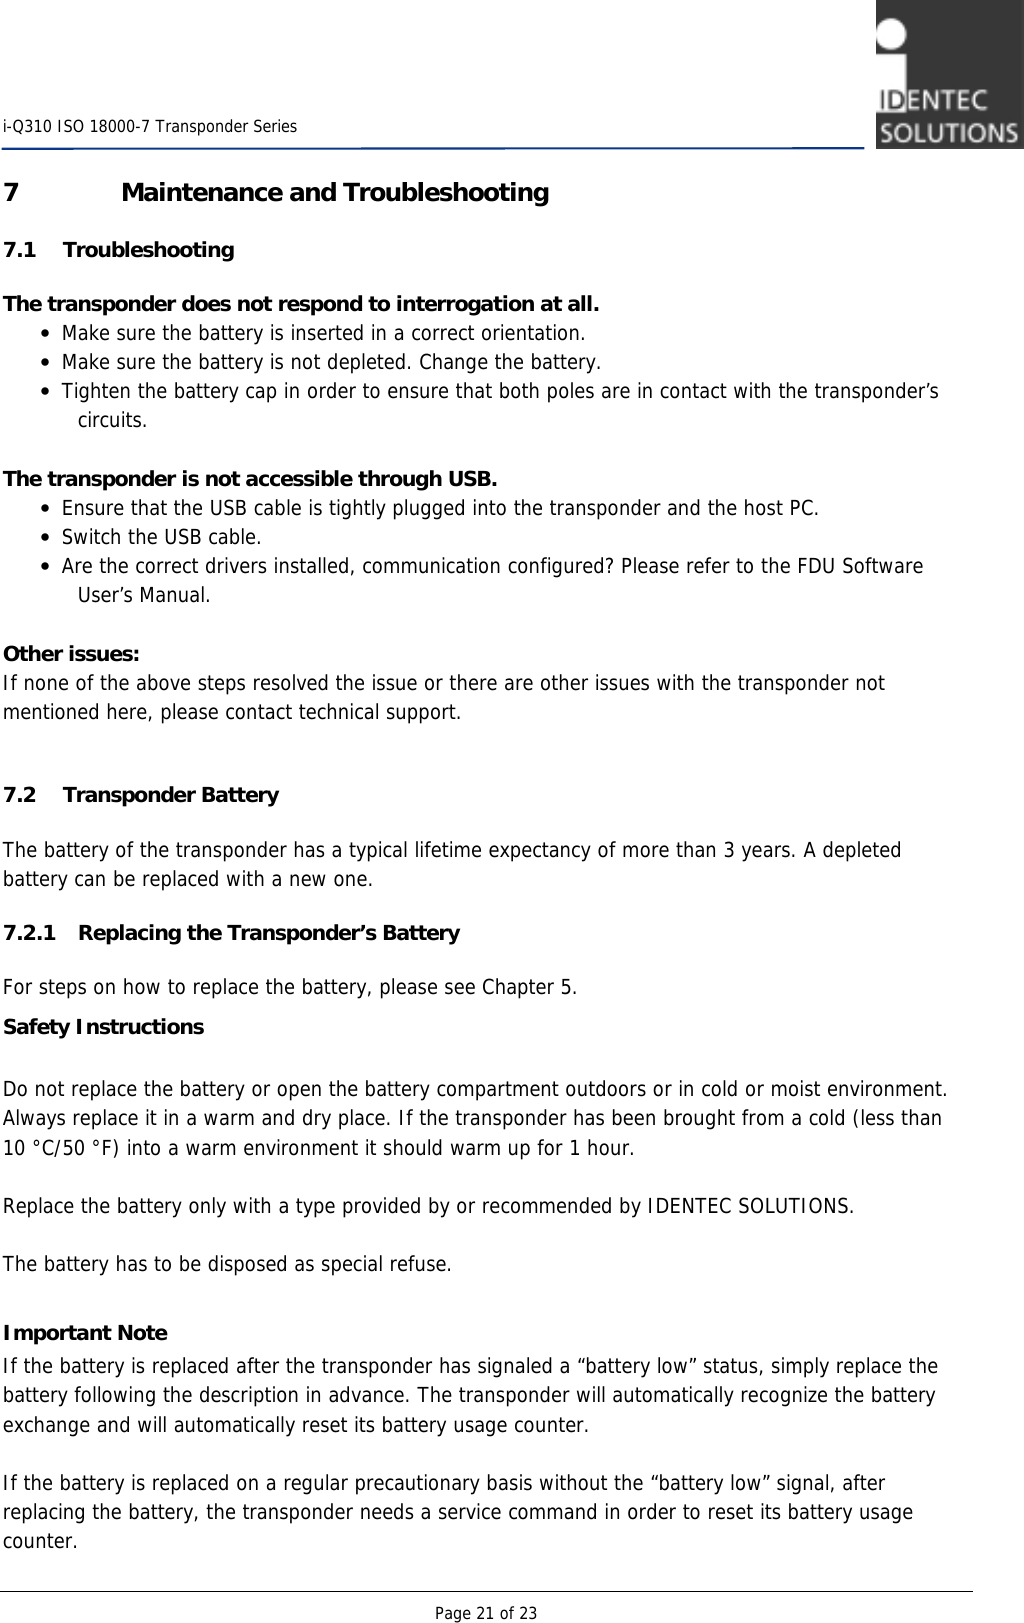    i-Q310 ISO 18000-7 Transponder Series  Page 21 of 23 7 Maintenance and Troubleshooting 7.1 Troubleshooting  The transponder does not respond to interrogation at all. • Make sure the battery is inserted in a correct orientation. • Make sure the battery is not depleted. Change the battery. • Tighten the battery cap in order to ensure that both poles are in contact with the transponder’s circuits.  The transponder is not accessible through USB. • Ensure that the USB cable is tightly plugged into the transponder and the host PC. • Switch the USB cable. • Are the correct drivers installed, communication configured? Please refer to the FDU Software User’s Manual.  Other issues: If none of the above steps resolved the issue or there are other issues with the transponder not mentioned here, please contact technical support.  7.2 Transponder Battery The battery of the transponder has a typical lifetime expectancy of more than 3 years. A depleted battery can be replaced with a new one. 7.2.1 Replacing the Transponder’s Battery For steps on how to replace the battery, please see Chapter 5. Safety Instructions  Do not replace the battery or open the battery compartment outdoors or in cold or moist environment. Always replace it in a warm and dry place. If the transponder has been brought from a cold (less than 10 °C/50 °F) into a warm environment it should warm up for 1 hour.  Replace the battery only with a type provided by or recommended by IDENTEC SOLUTIONS.  The battery has to be disposed as special refuse.  Important Note If the battery is replaced after the transponder has signaled a “battery low” status, simply replace the battery following the description in advance. The transponder will automatically recognize the battery exchange and will automatically reset its battery usage counter.  If the battery is replaced on a regular precautionary basis without the “battery low” signal, after replacing the battery, the transponder needs a service command in order to reset its battery usage counter. 